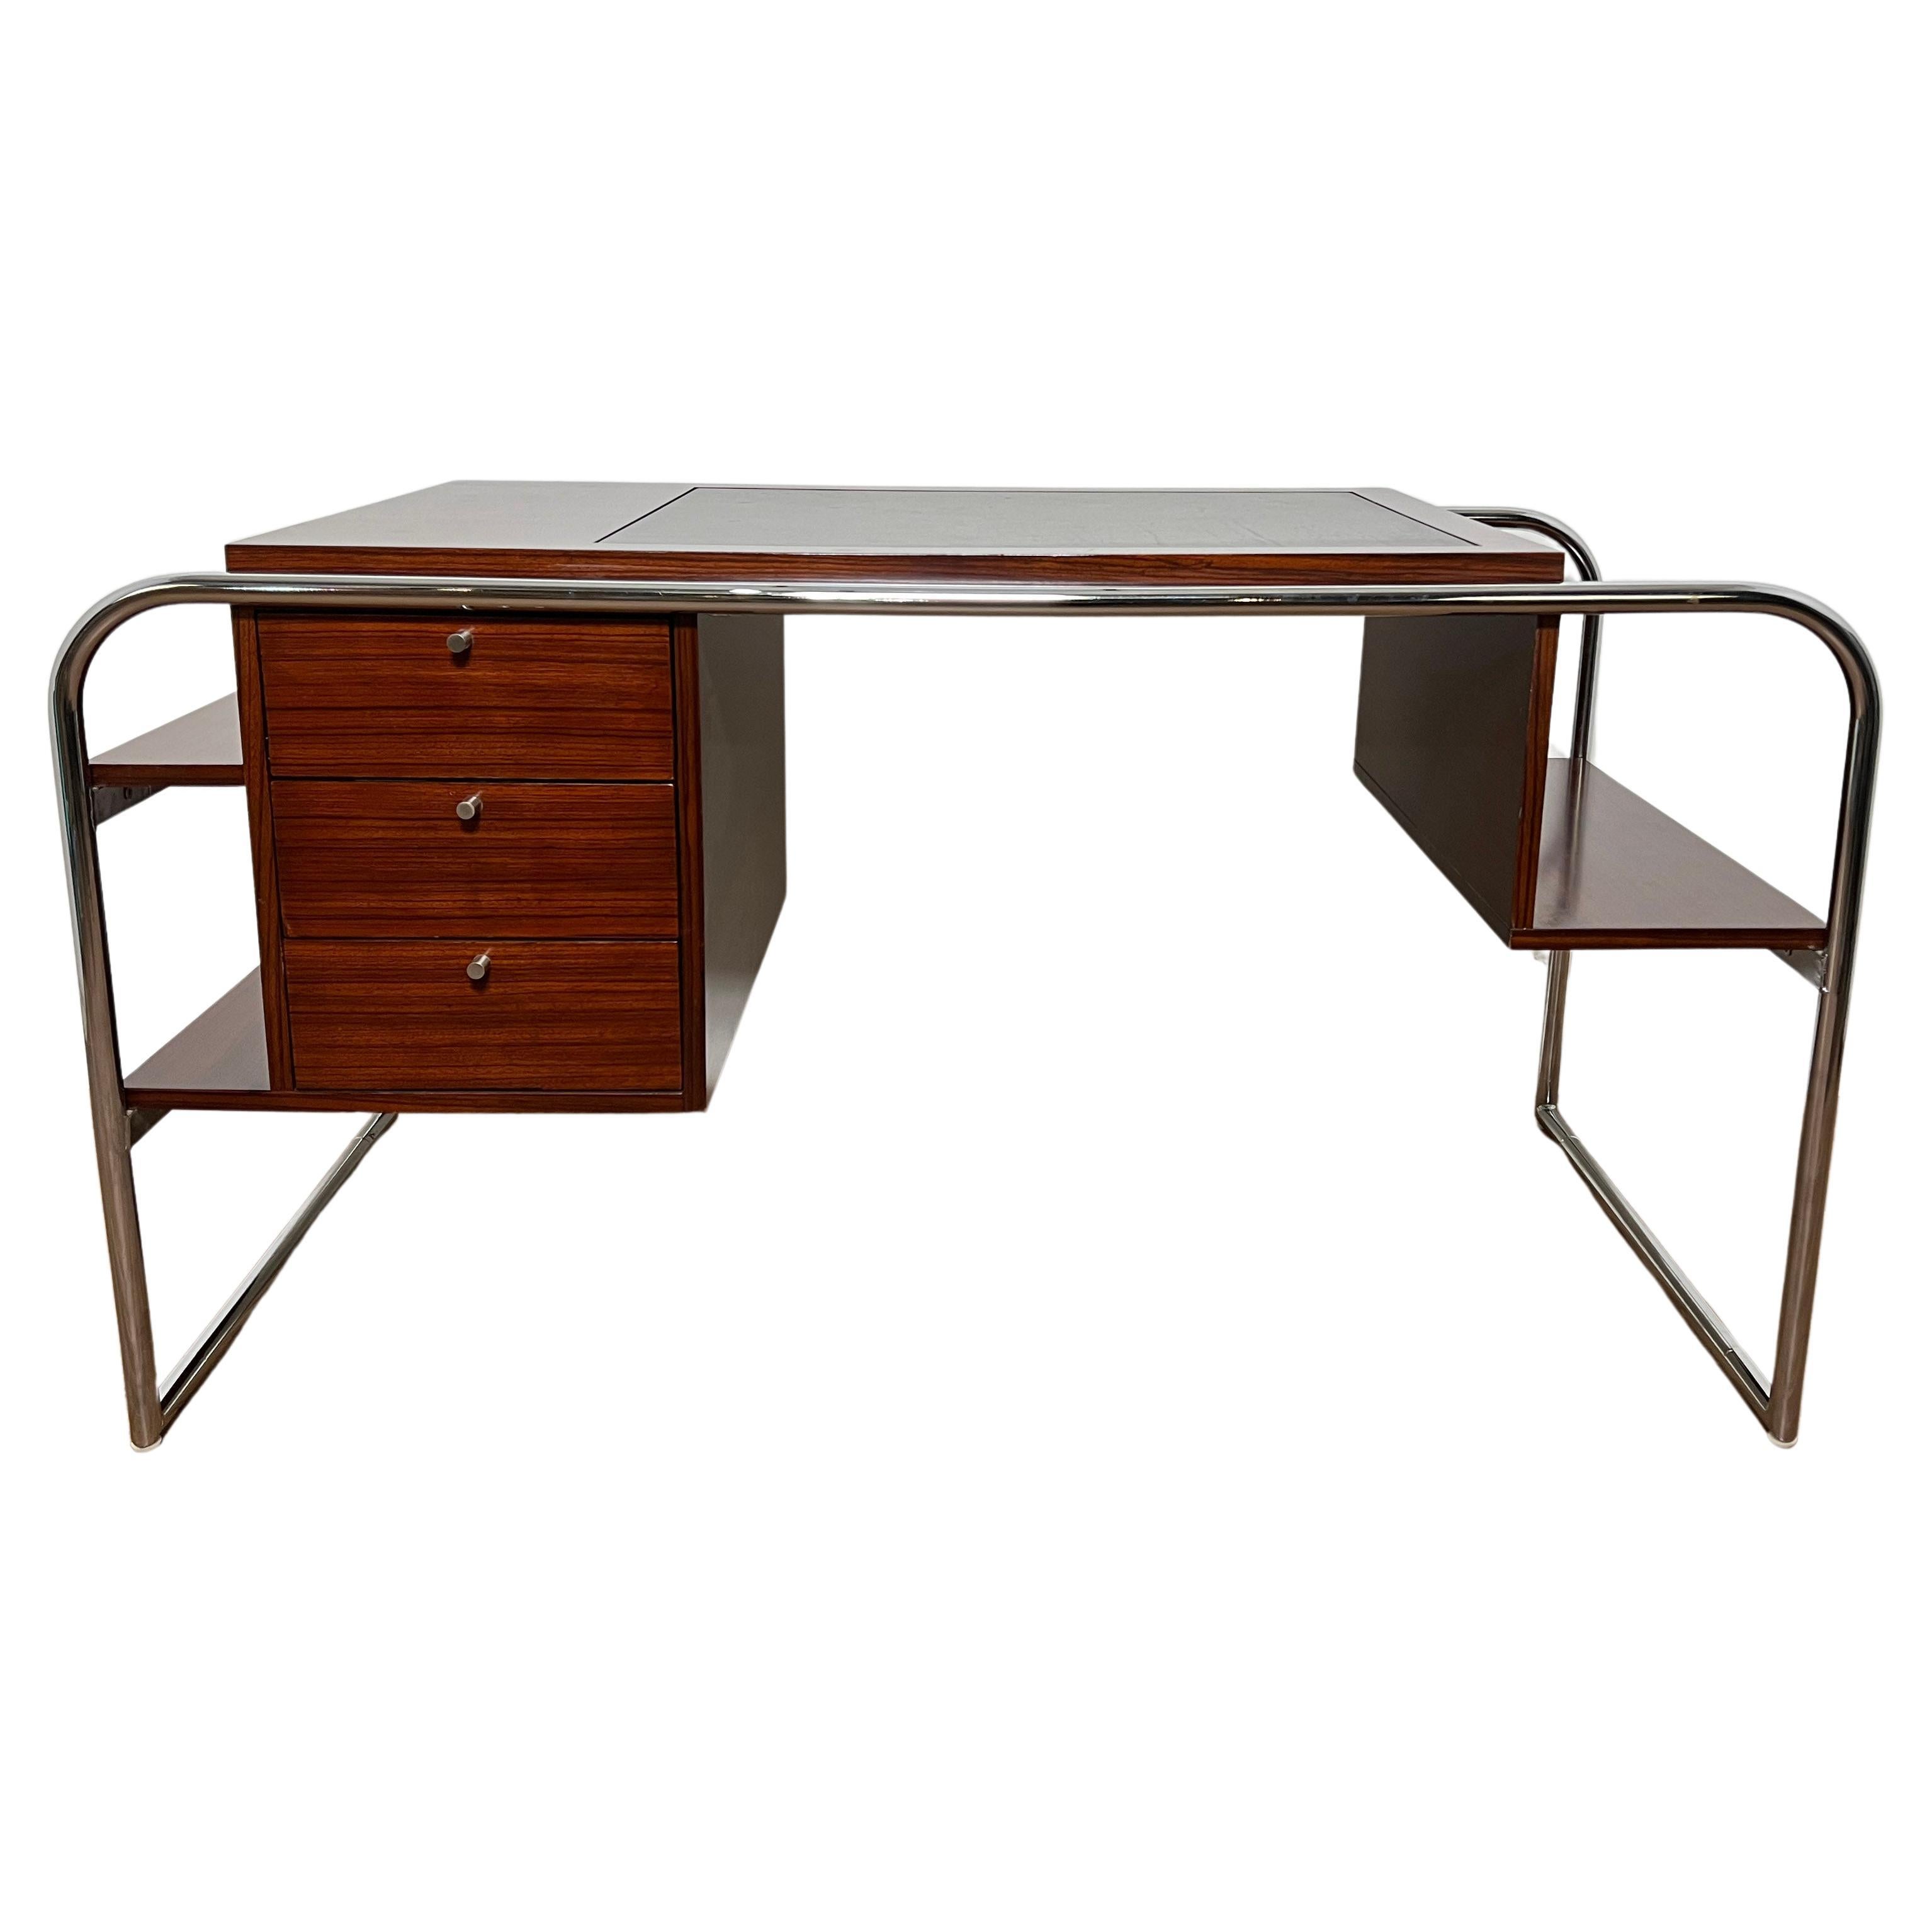 Ralph Lauren Bauhaus Inspired Desk in Wenge, Chrome and Leather